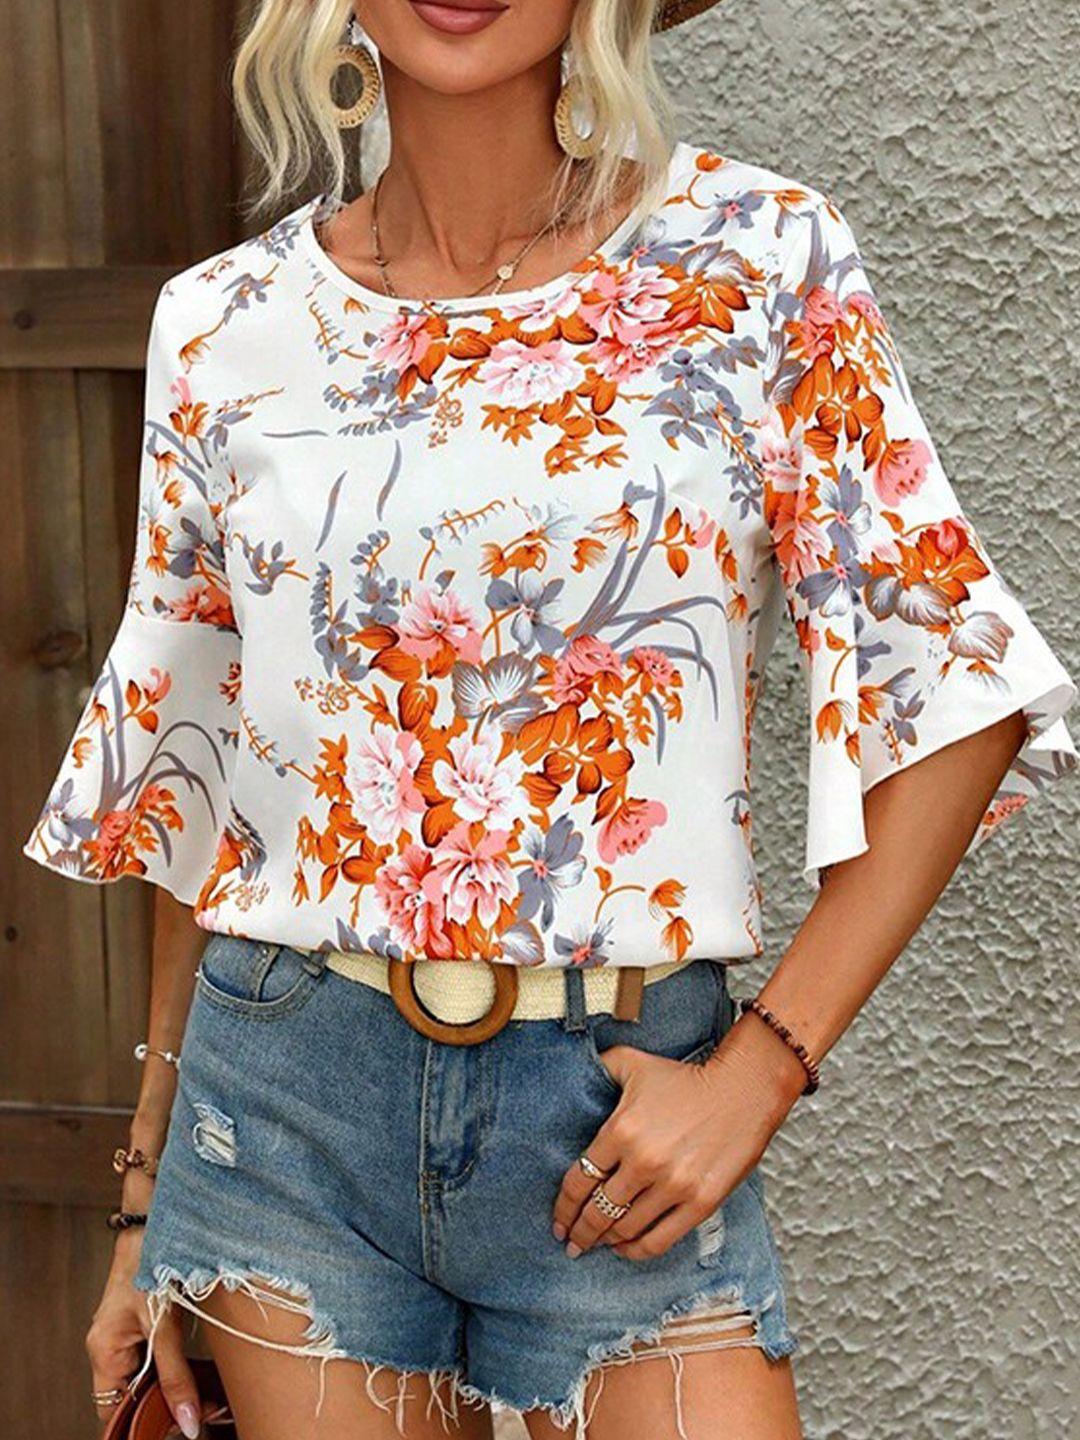 stylecast-floral-print-bell-sleeve-top